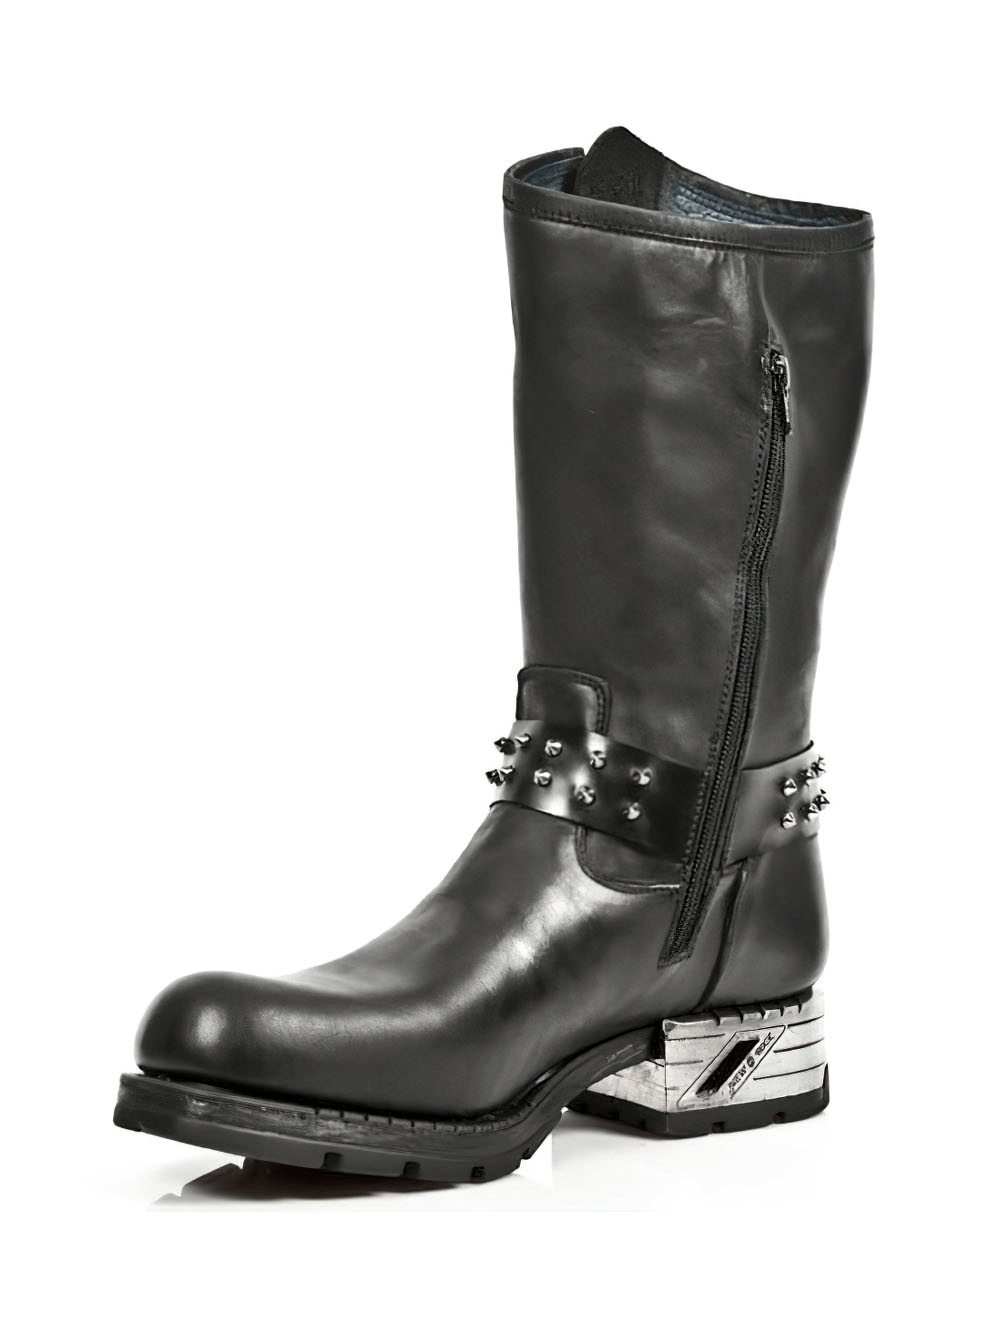 NEW ROCK Gothic Leather Boots with Metallic Embellishments